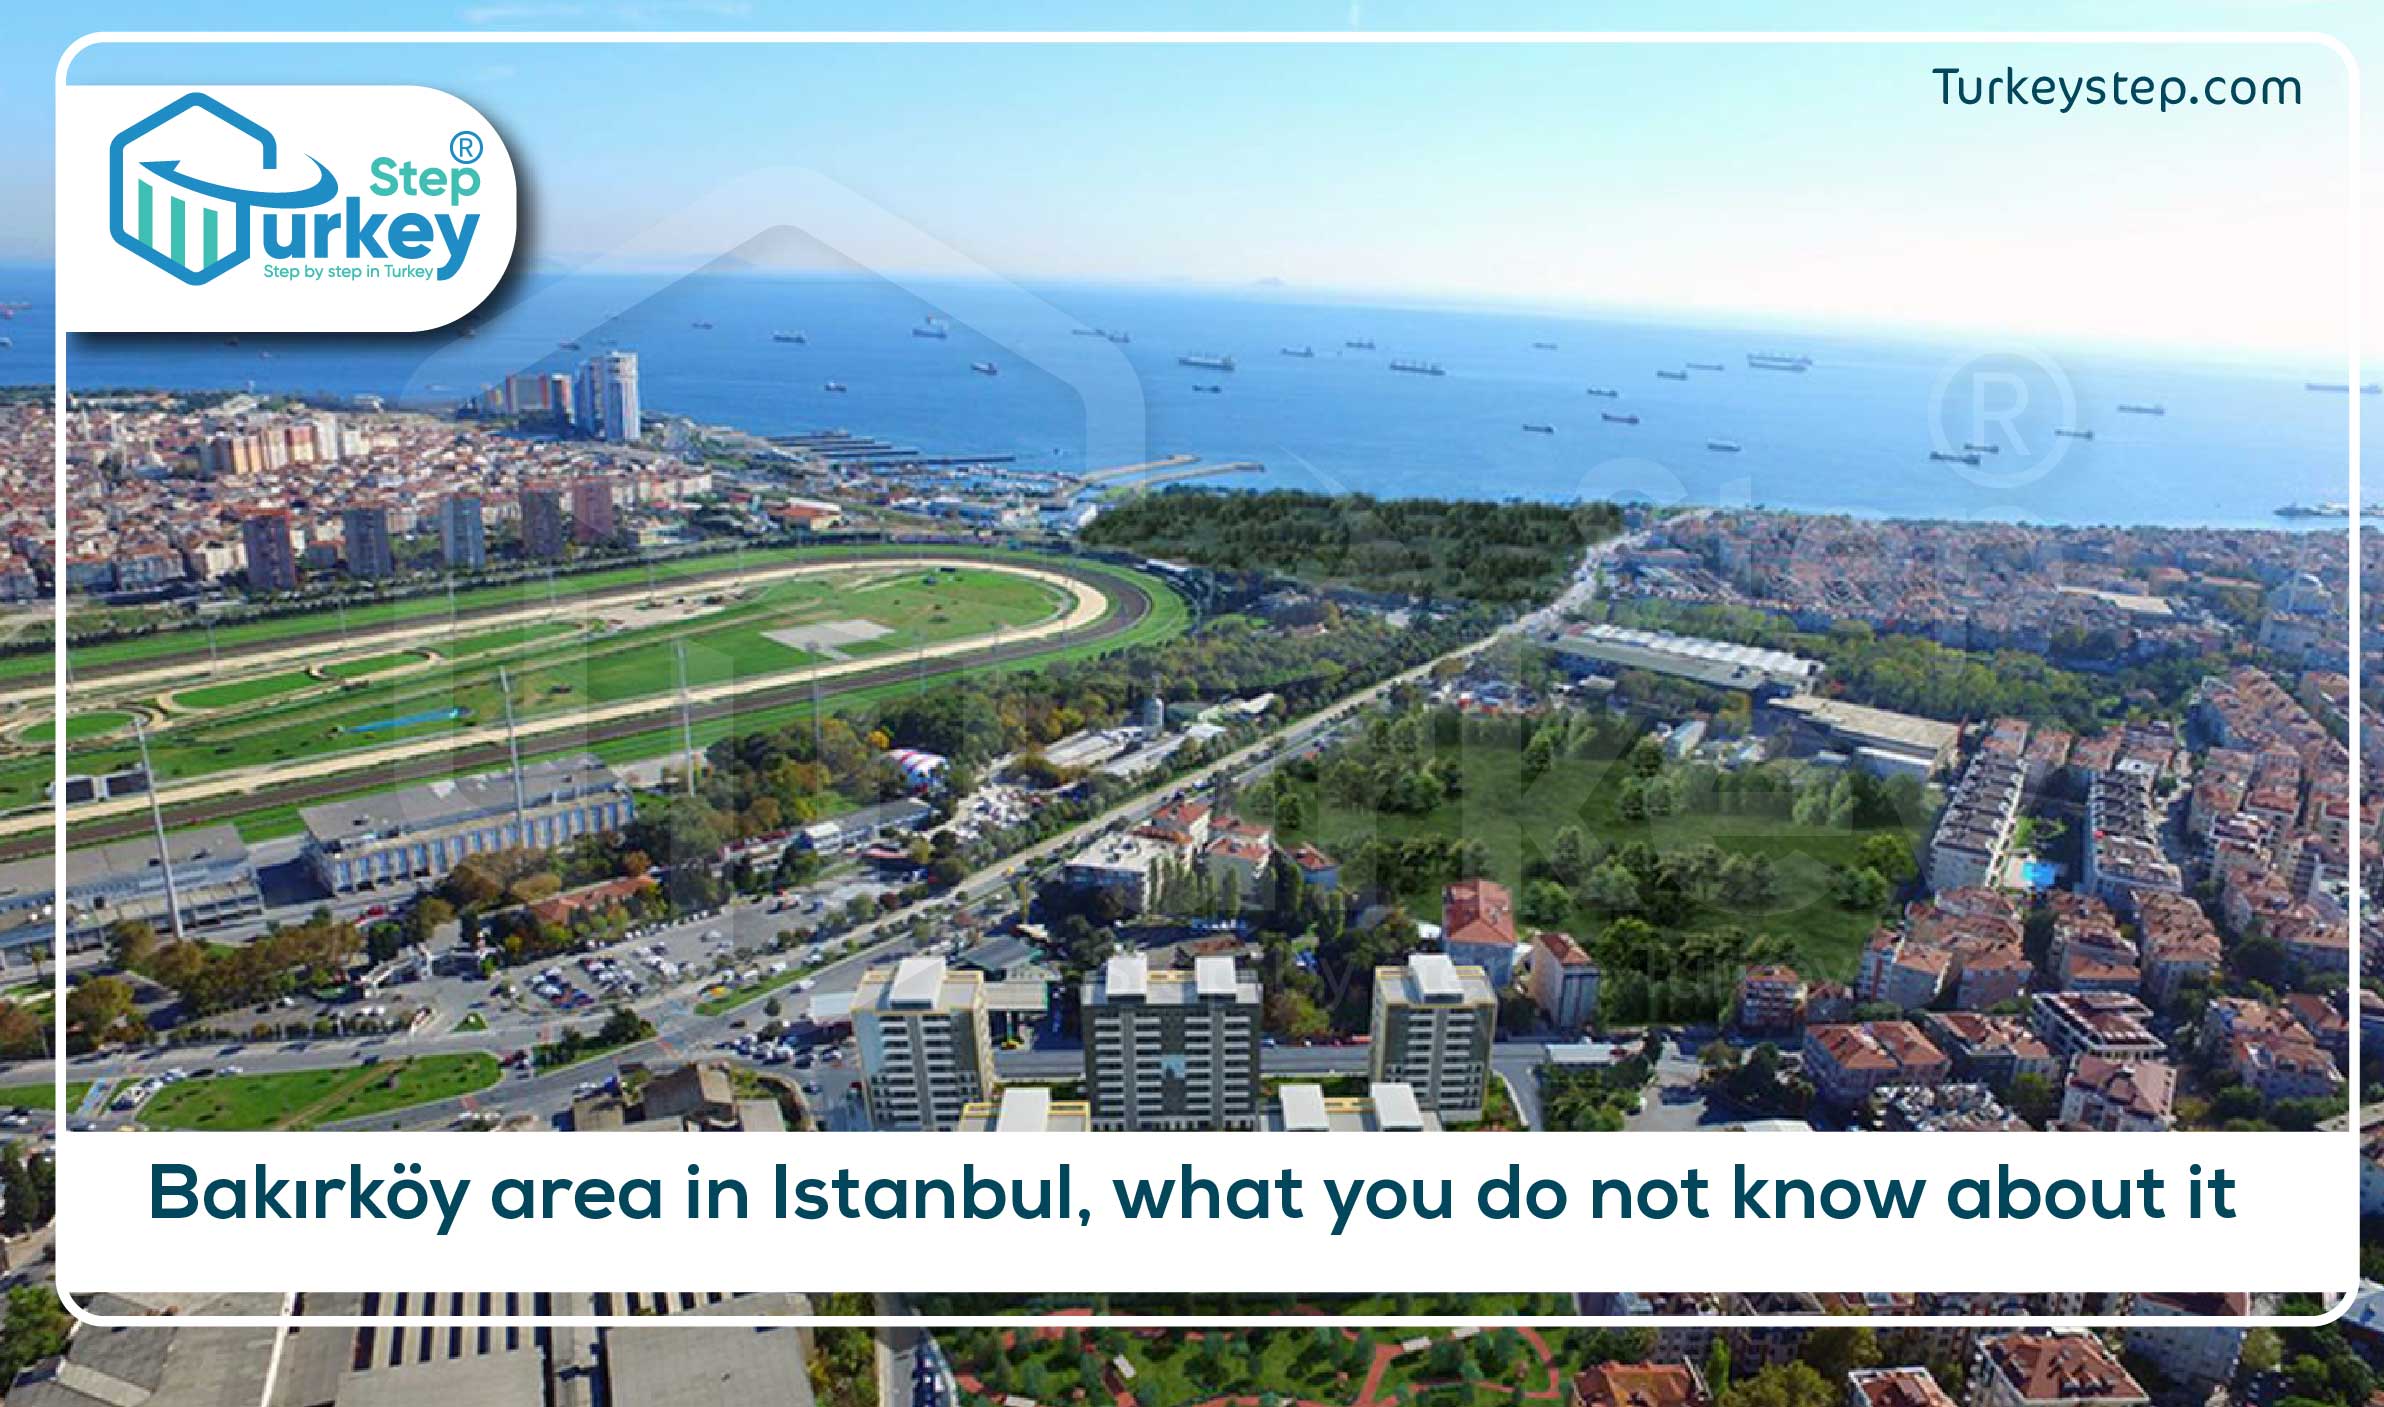 Bakırköy area in Istanbul, what you do not know about it